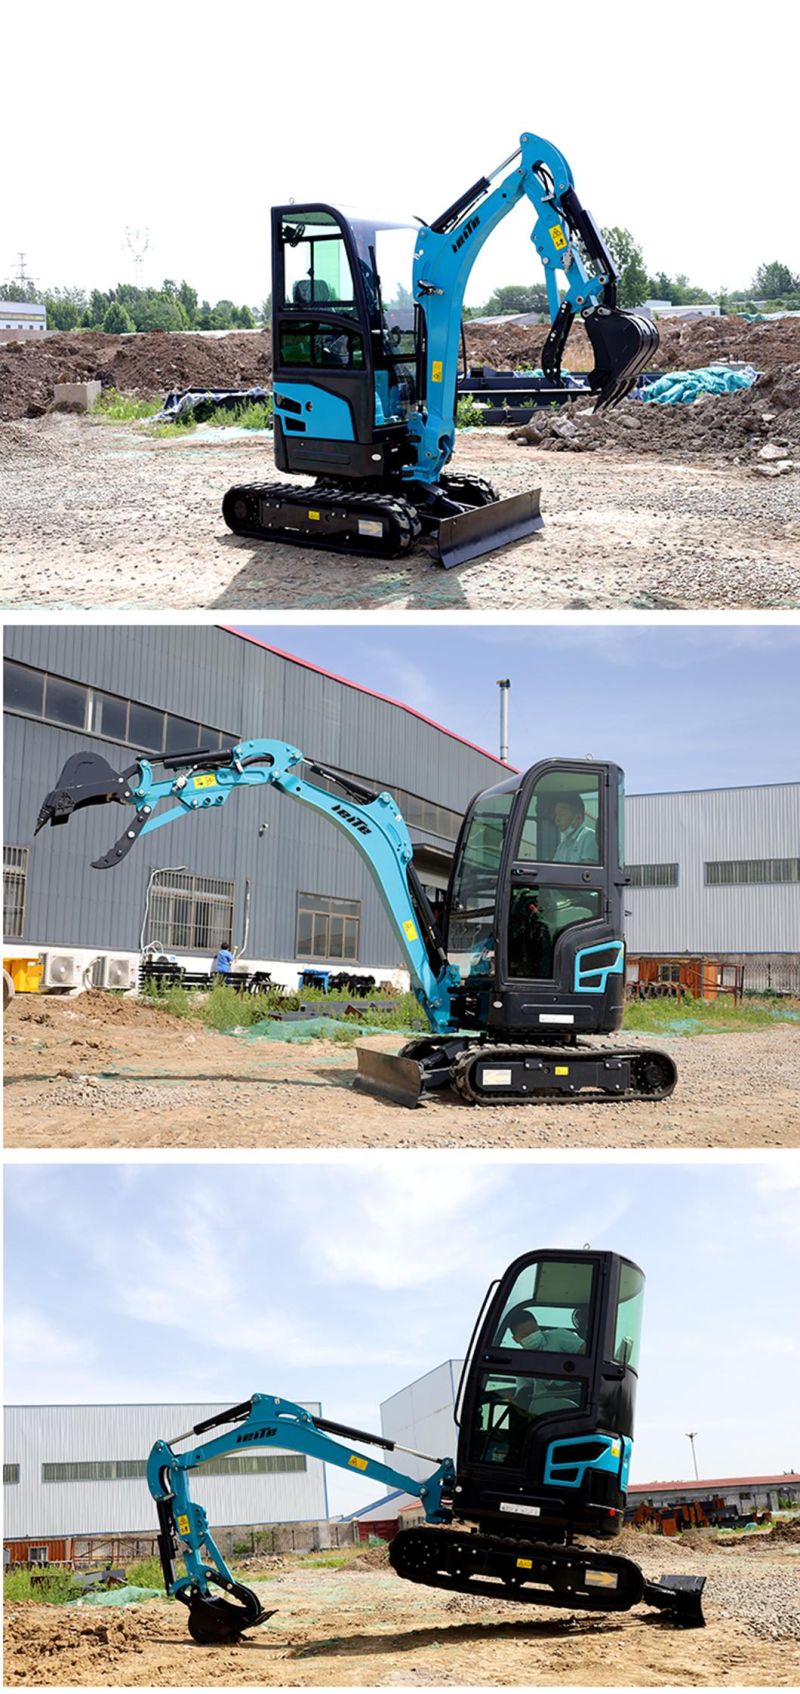 Small Digger Agricultural Excavator Small Orchard Excavator 2.0ton Hydraulic Crawler Mini Excavator